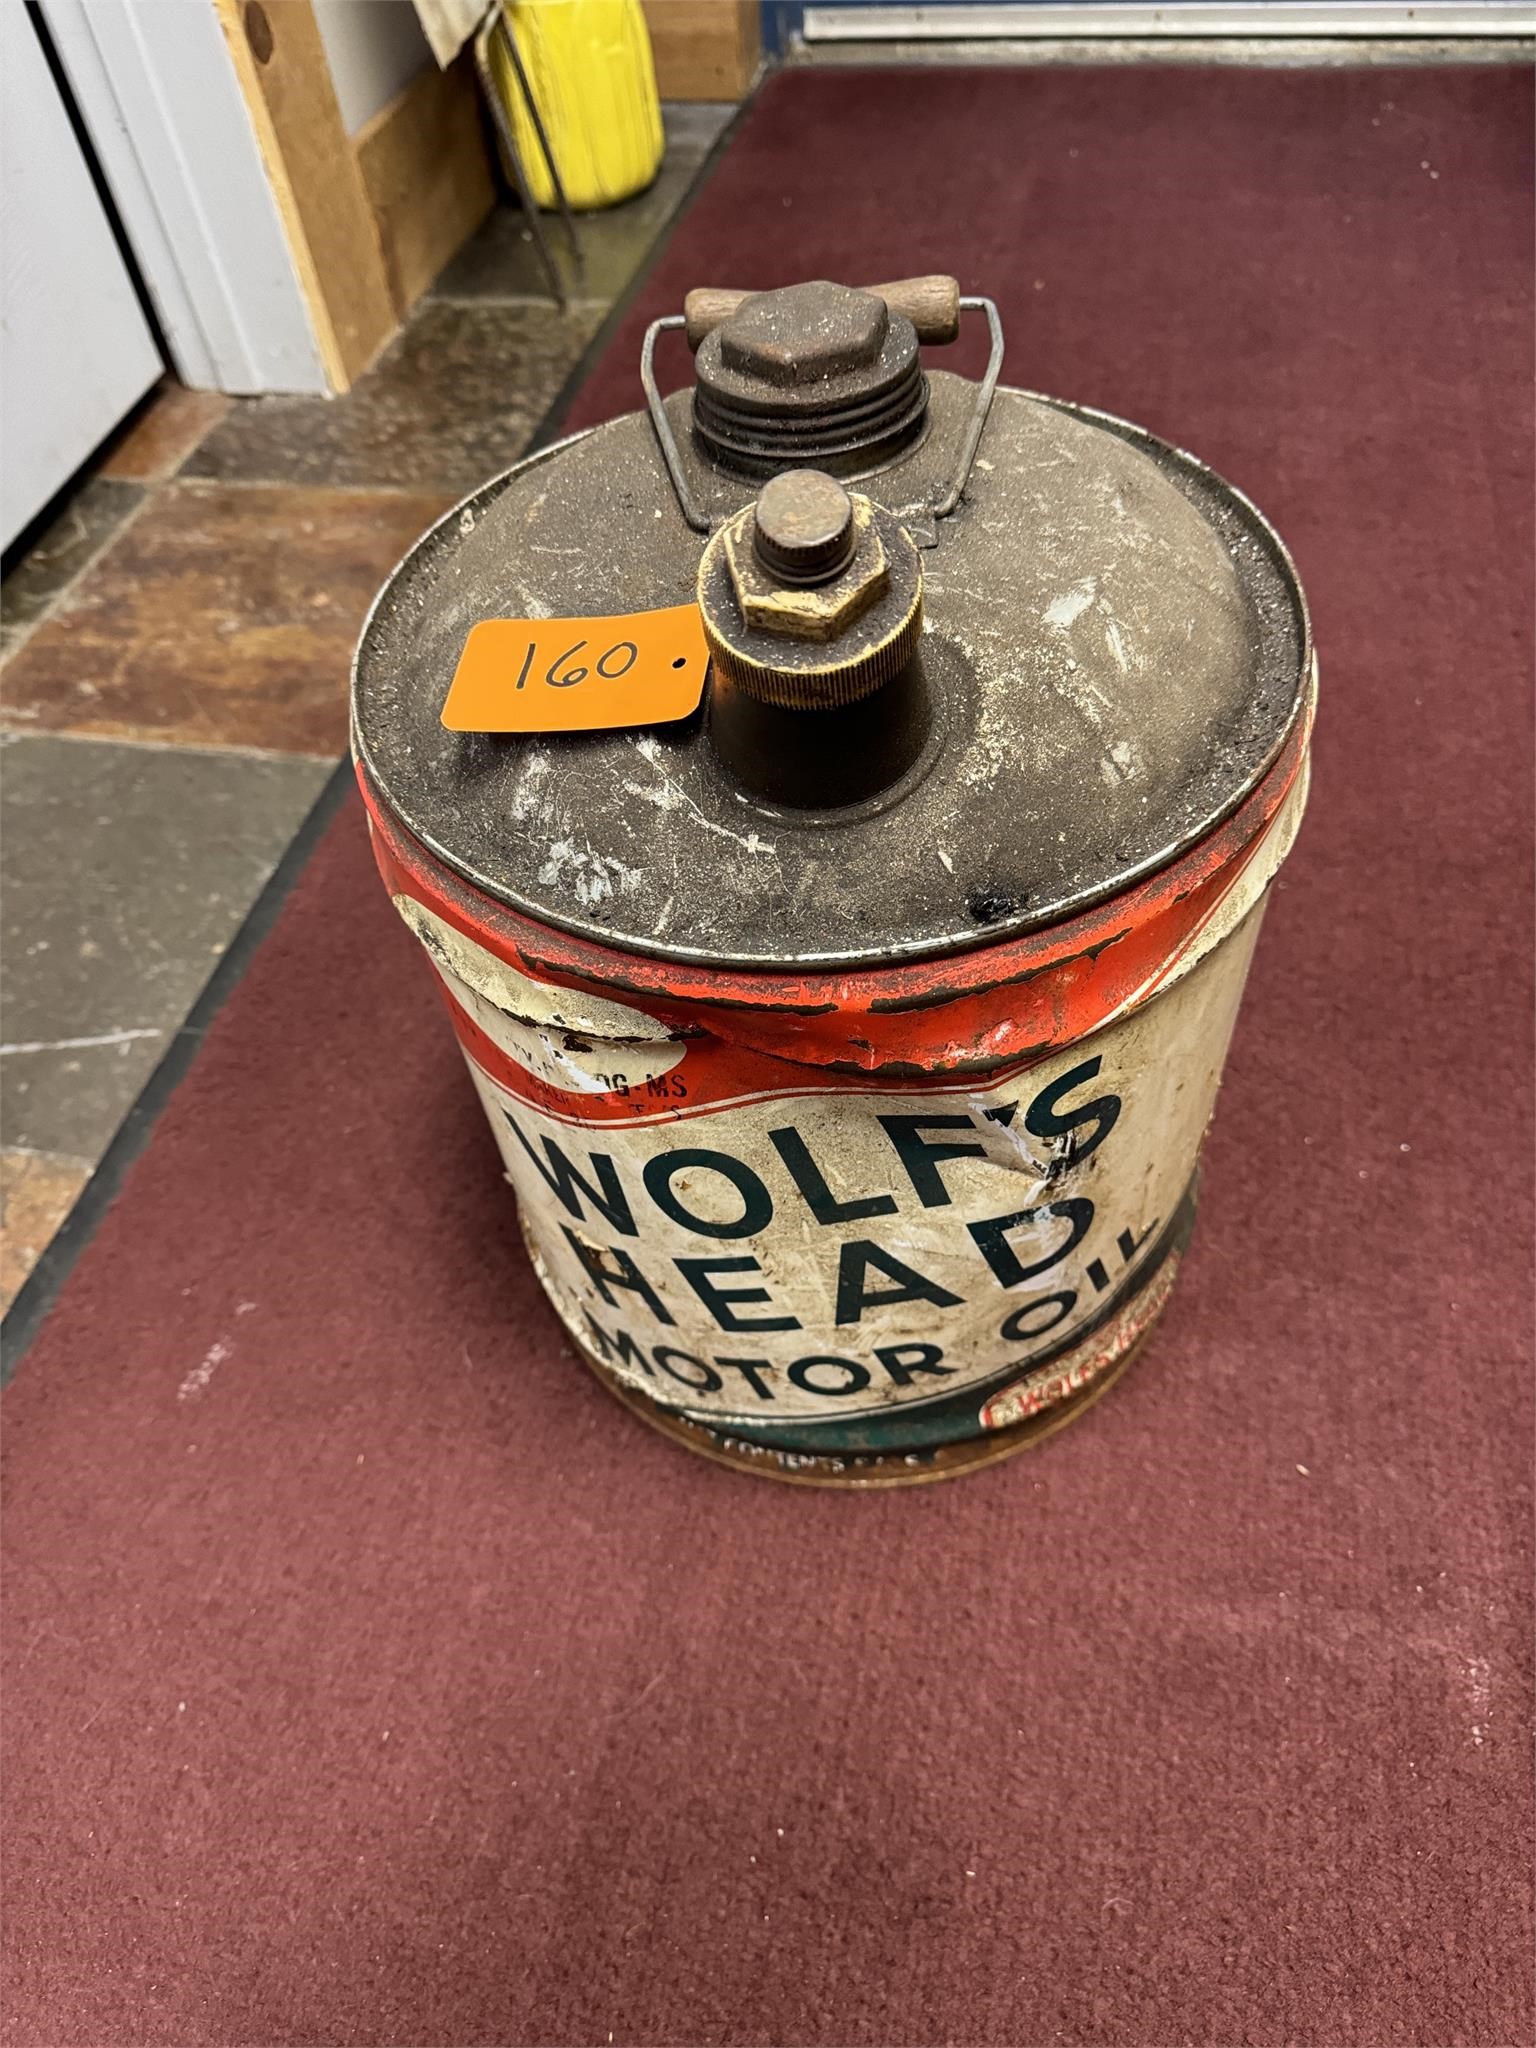 Vintage 5 gallon Wolf Head Motor Oil Can